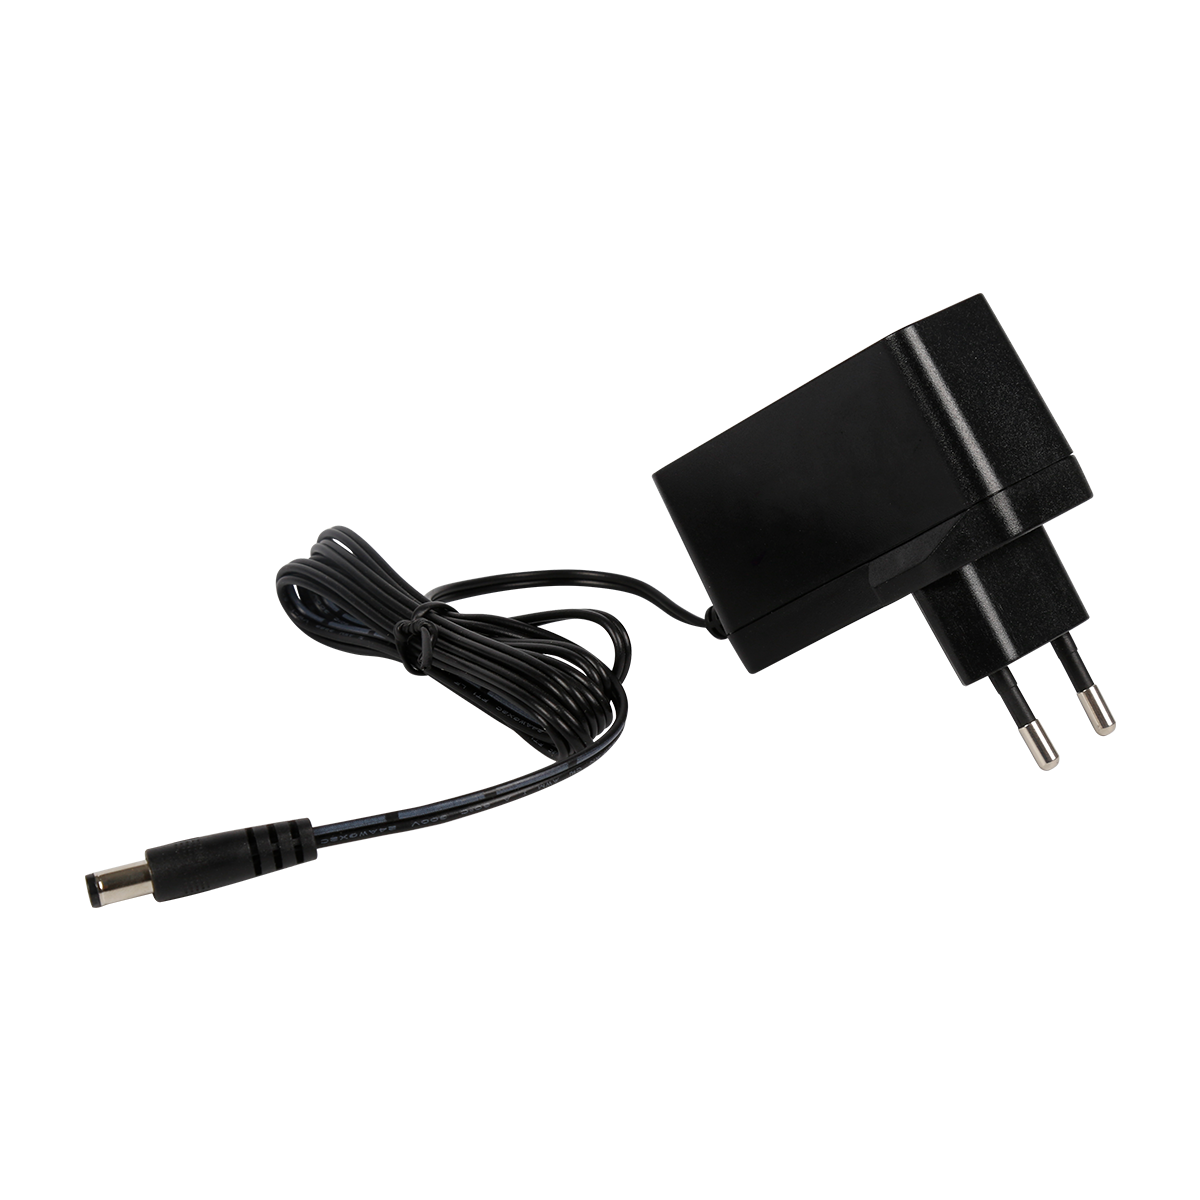 Computer power adapter manufacturers.dc power adapters Production(图1)